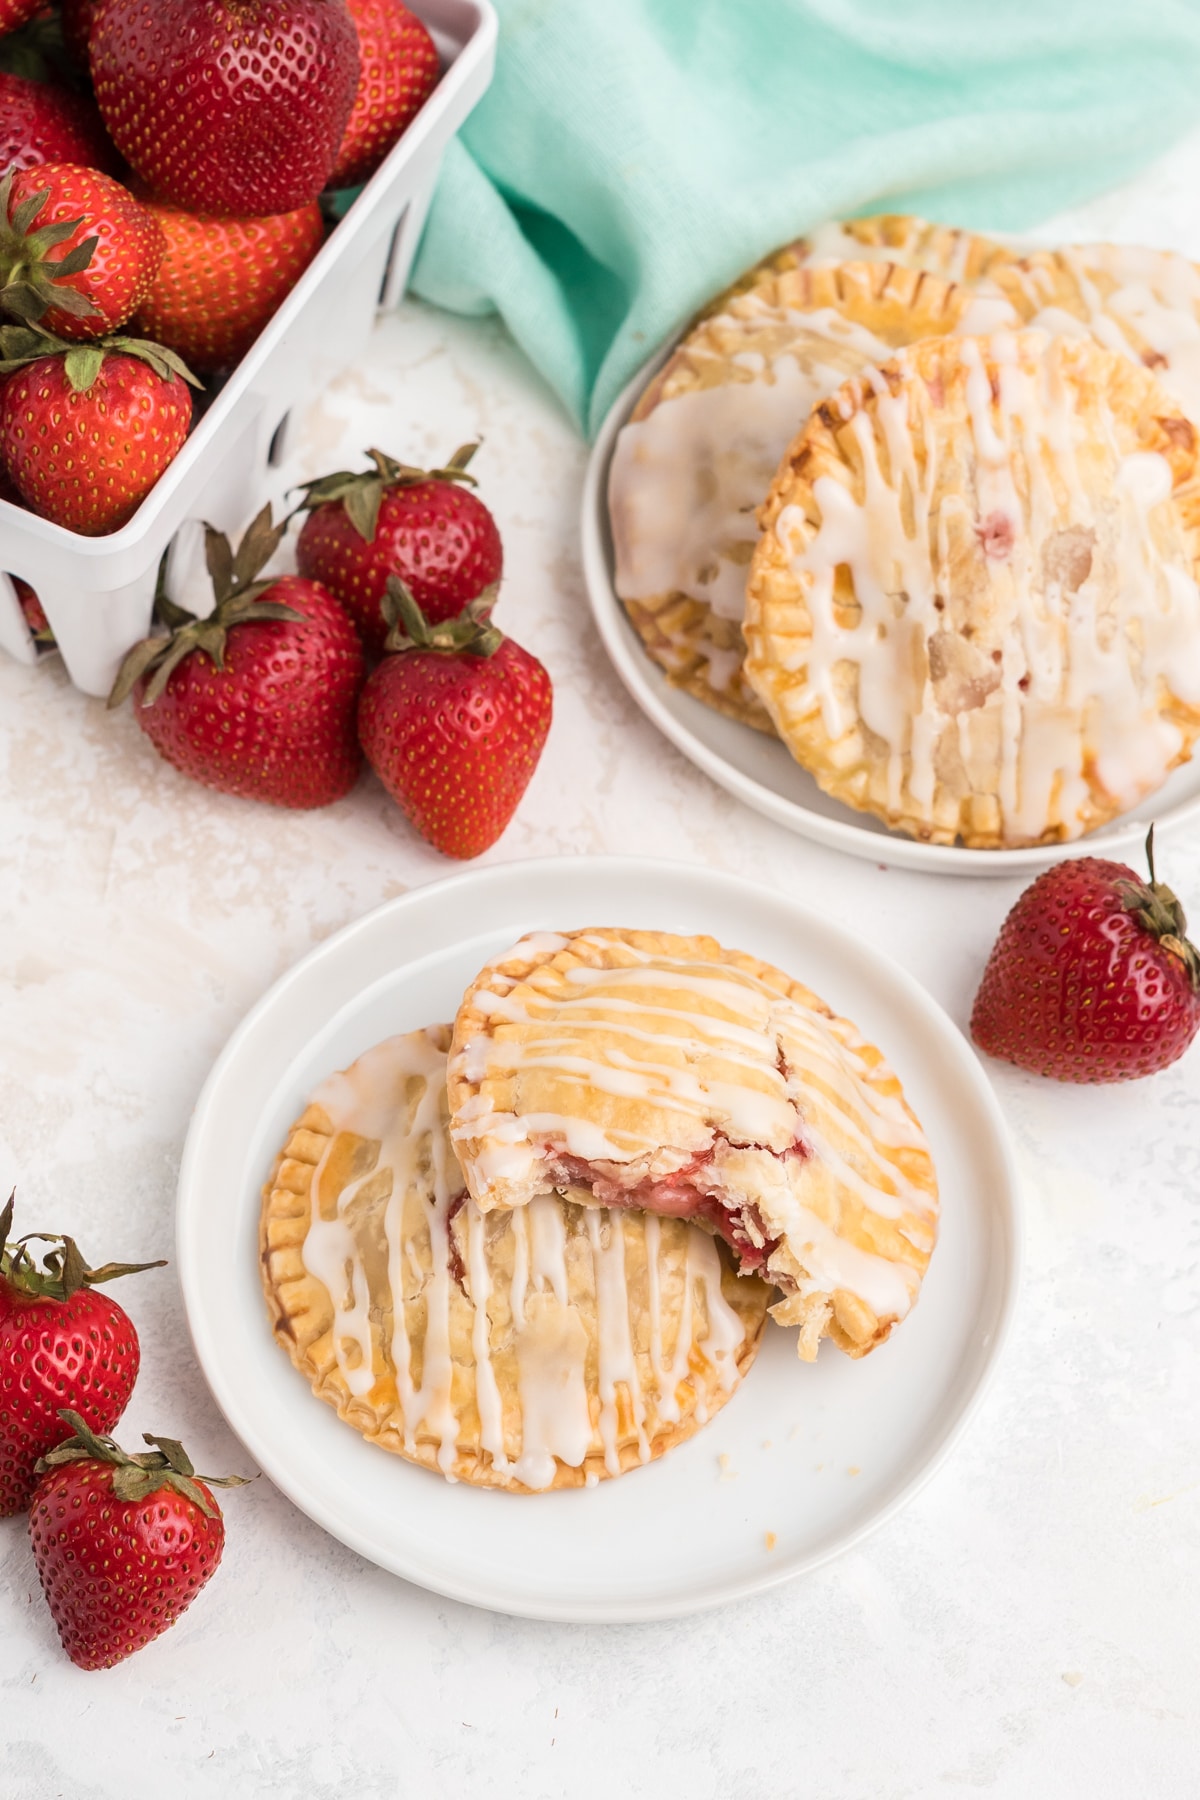 Air fryer strawberry hand pies served up on the table on two plates with fresh strawberries.